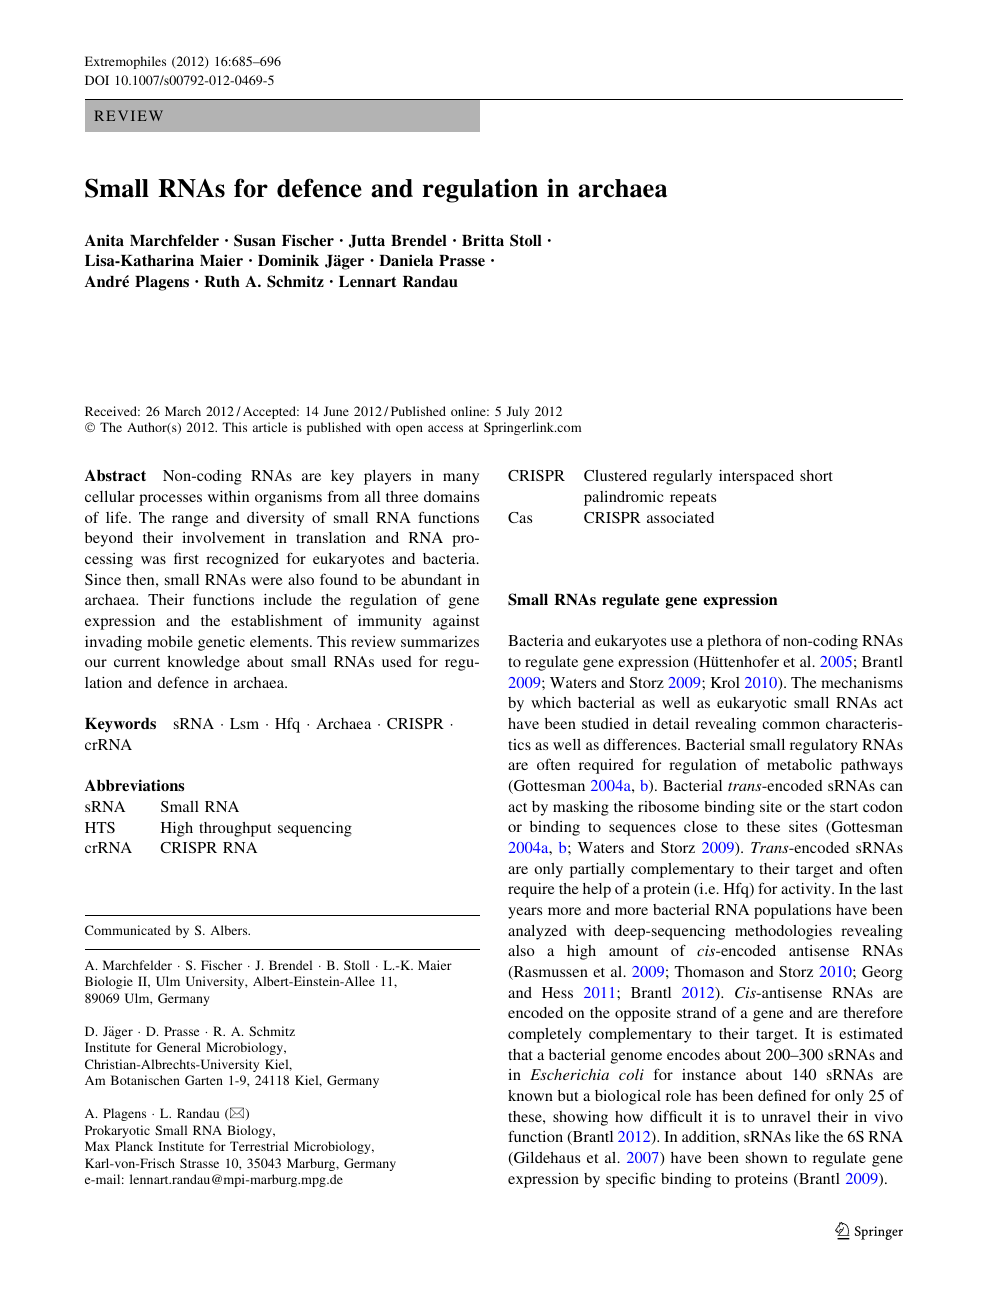 Small Rnas For Defence And Regulation In Archaea Topic Of Research Paper In Biological Sciences Download Scholarly Article Pdf And Read For Free On Cyberleninka Open Science Hub